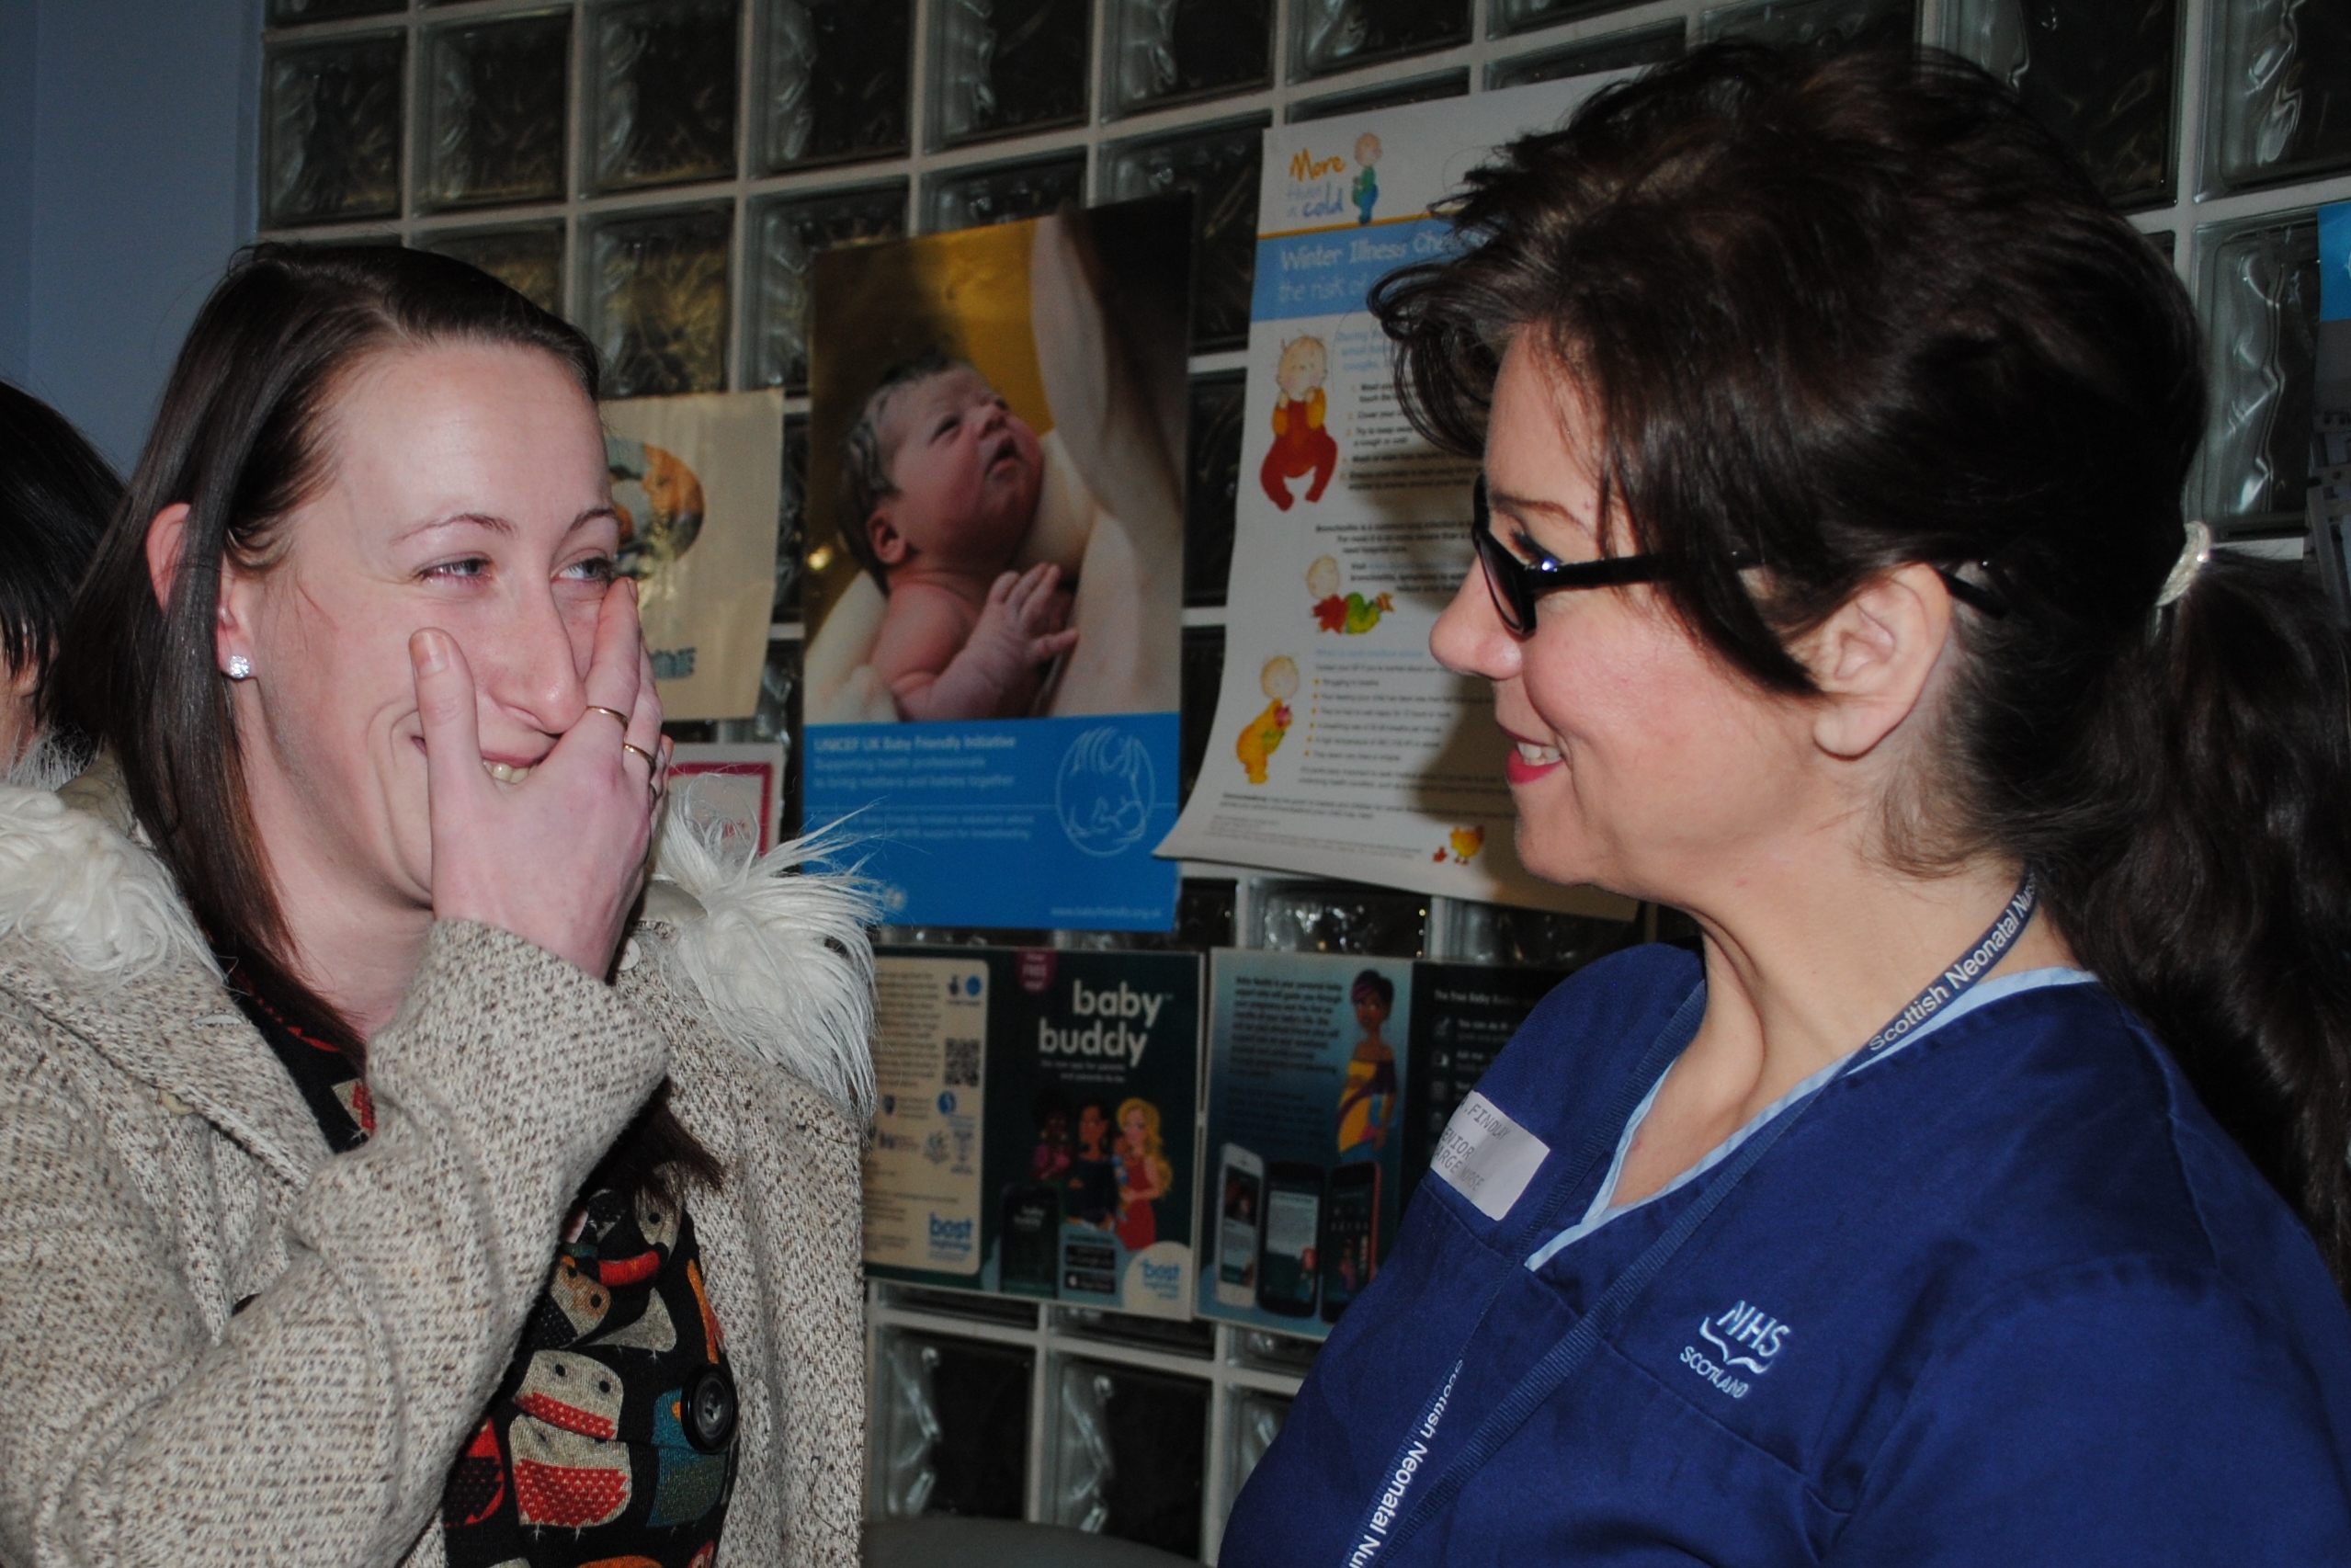 Amy-Louise and senior charge nurse Alison Findlay catch up during the get-together.